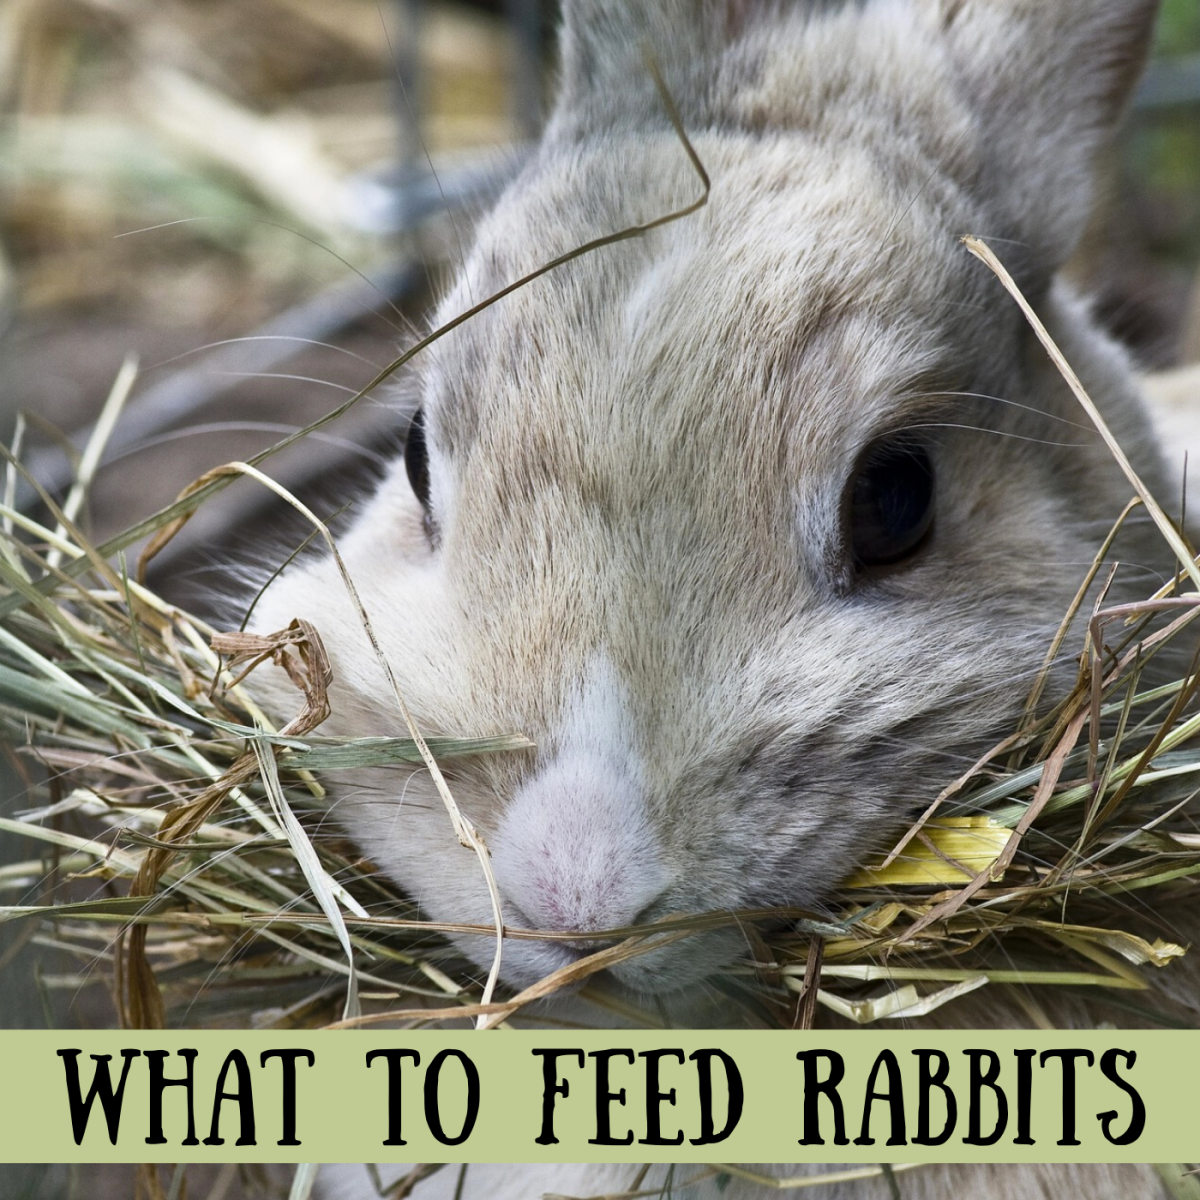 How To Make Sure Your Mini Lop Is Eating Properly